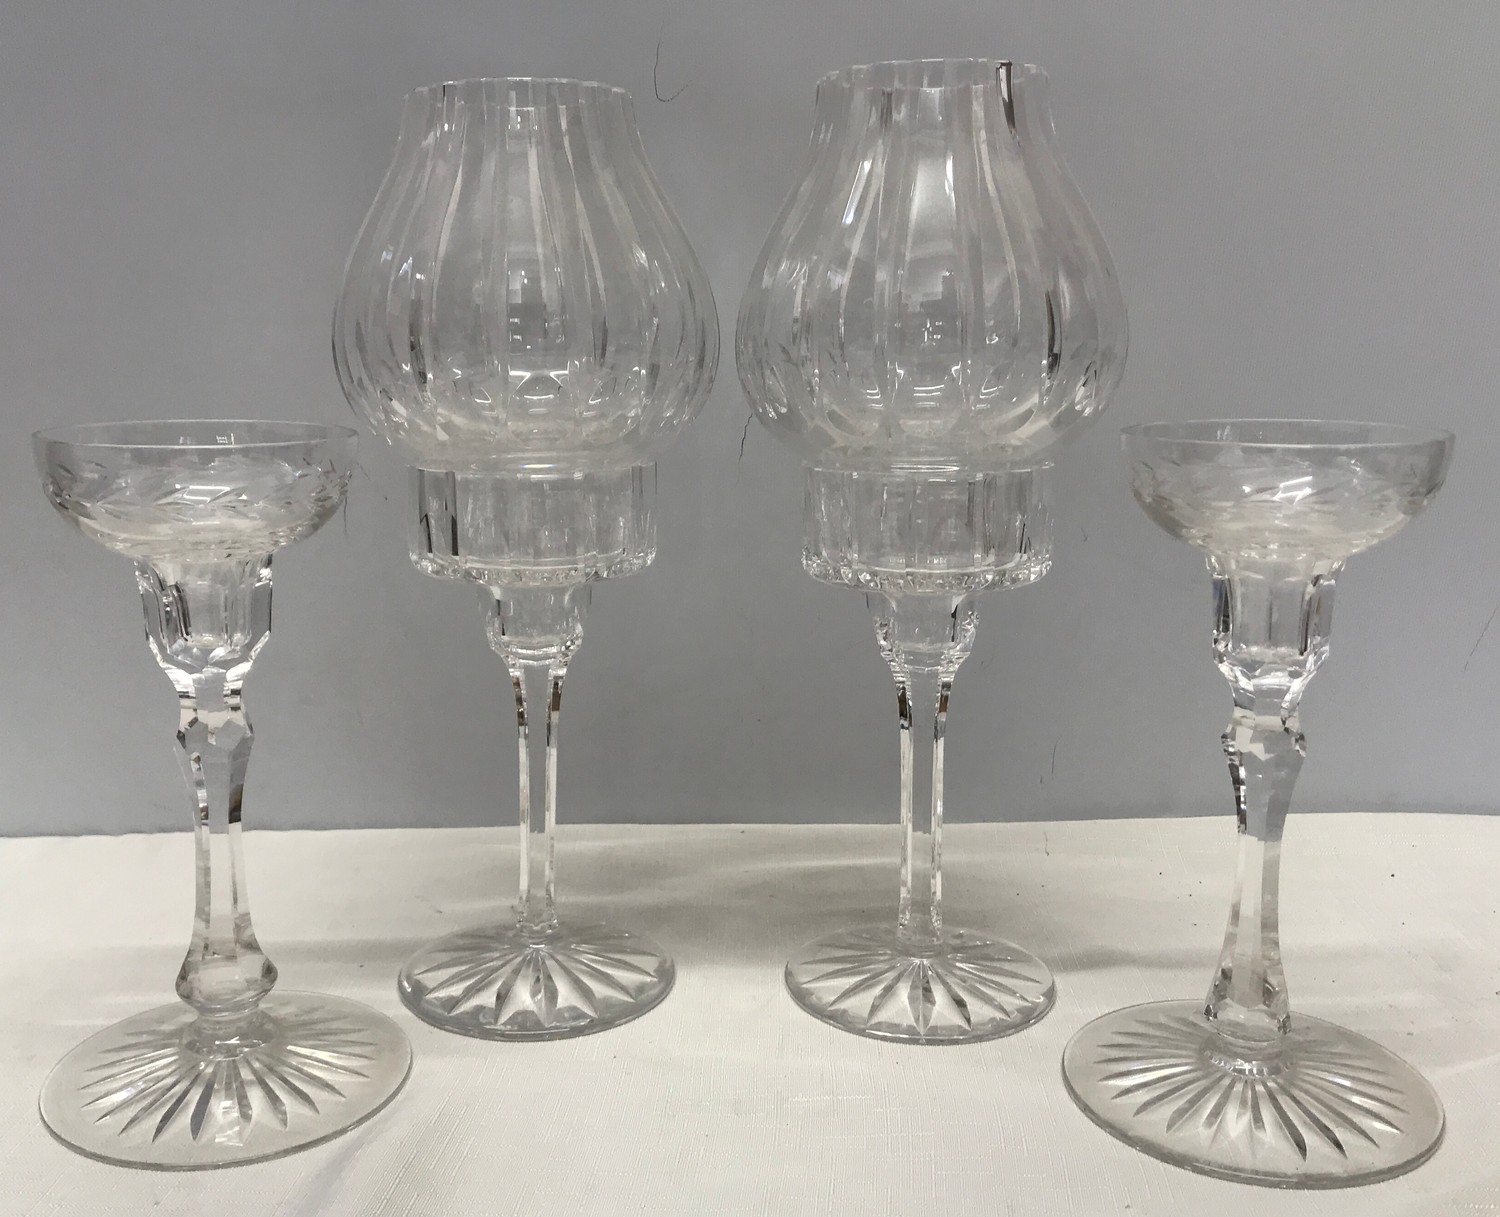 Two pairs of cut glass candlesticks, one pair with shades, 31cms h, small pair 20cms h.Condition